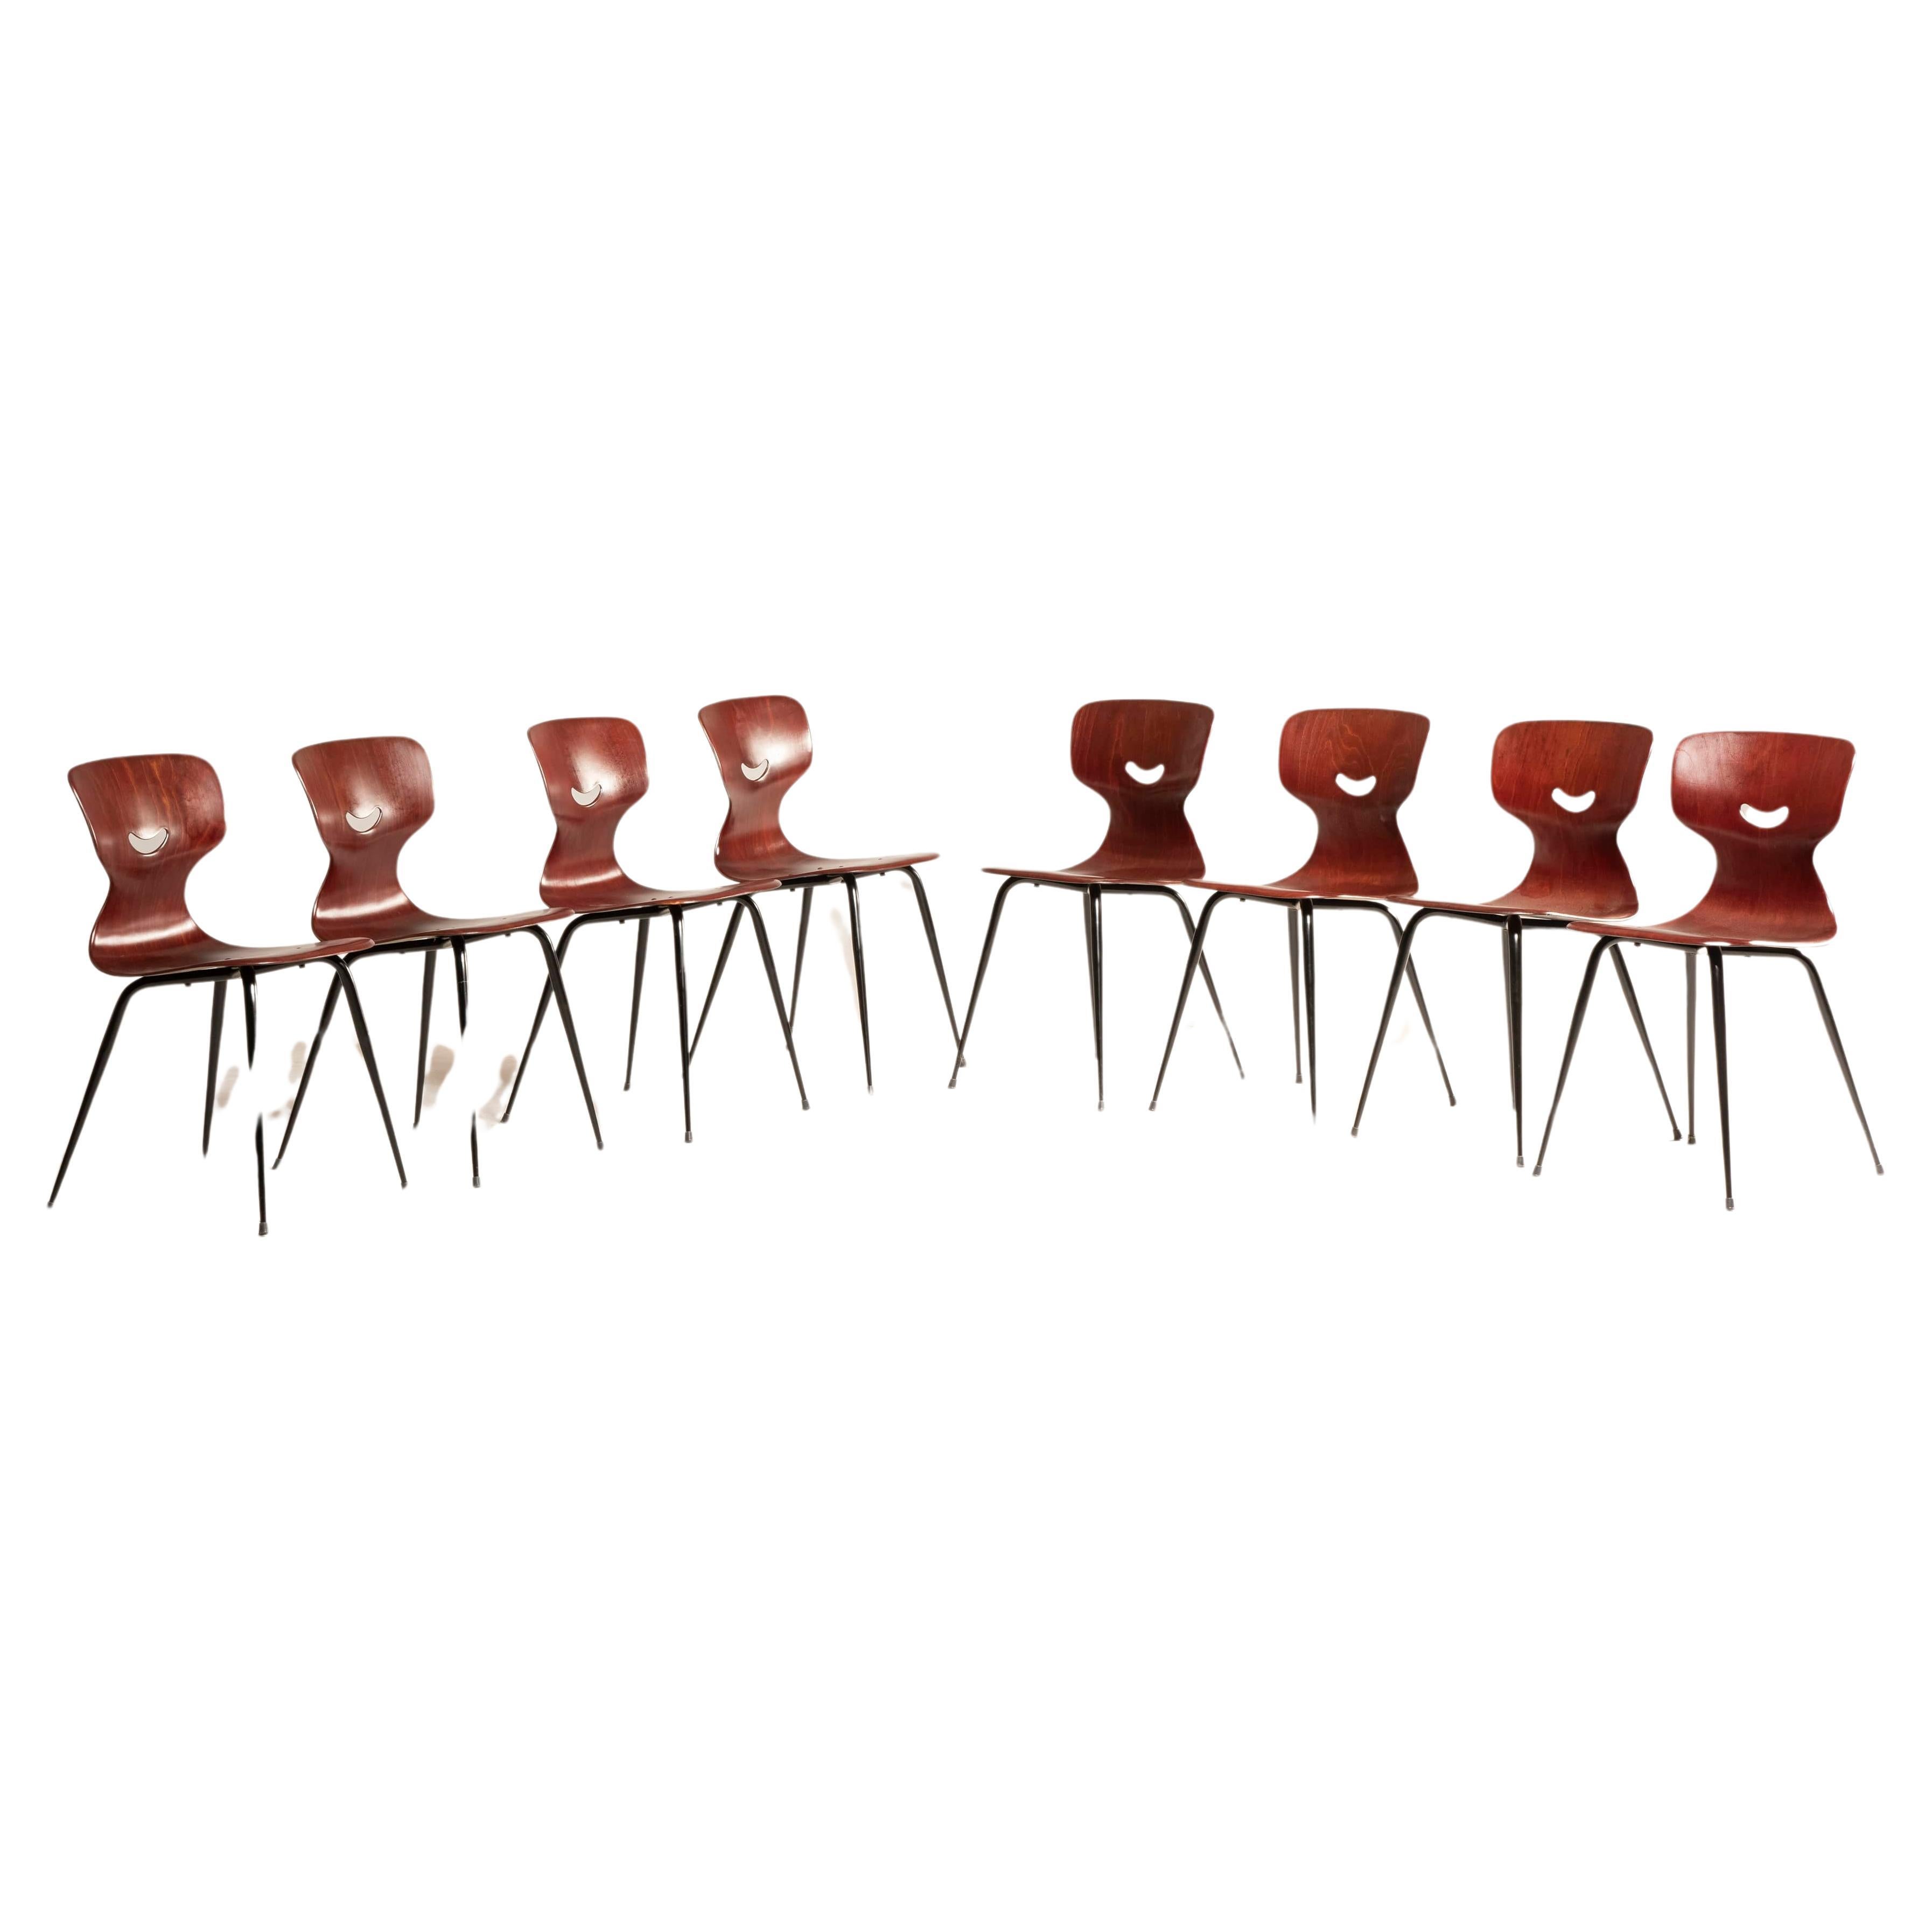 1960s Pagholz Danish Dark PlyWood Shaped Chairs Set of 8 